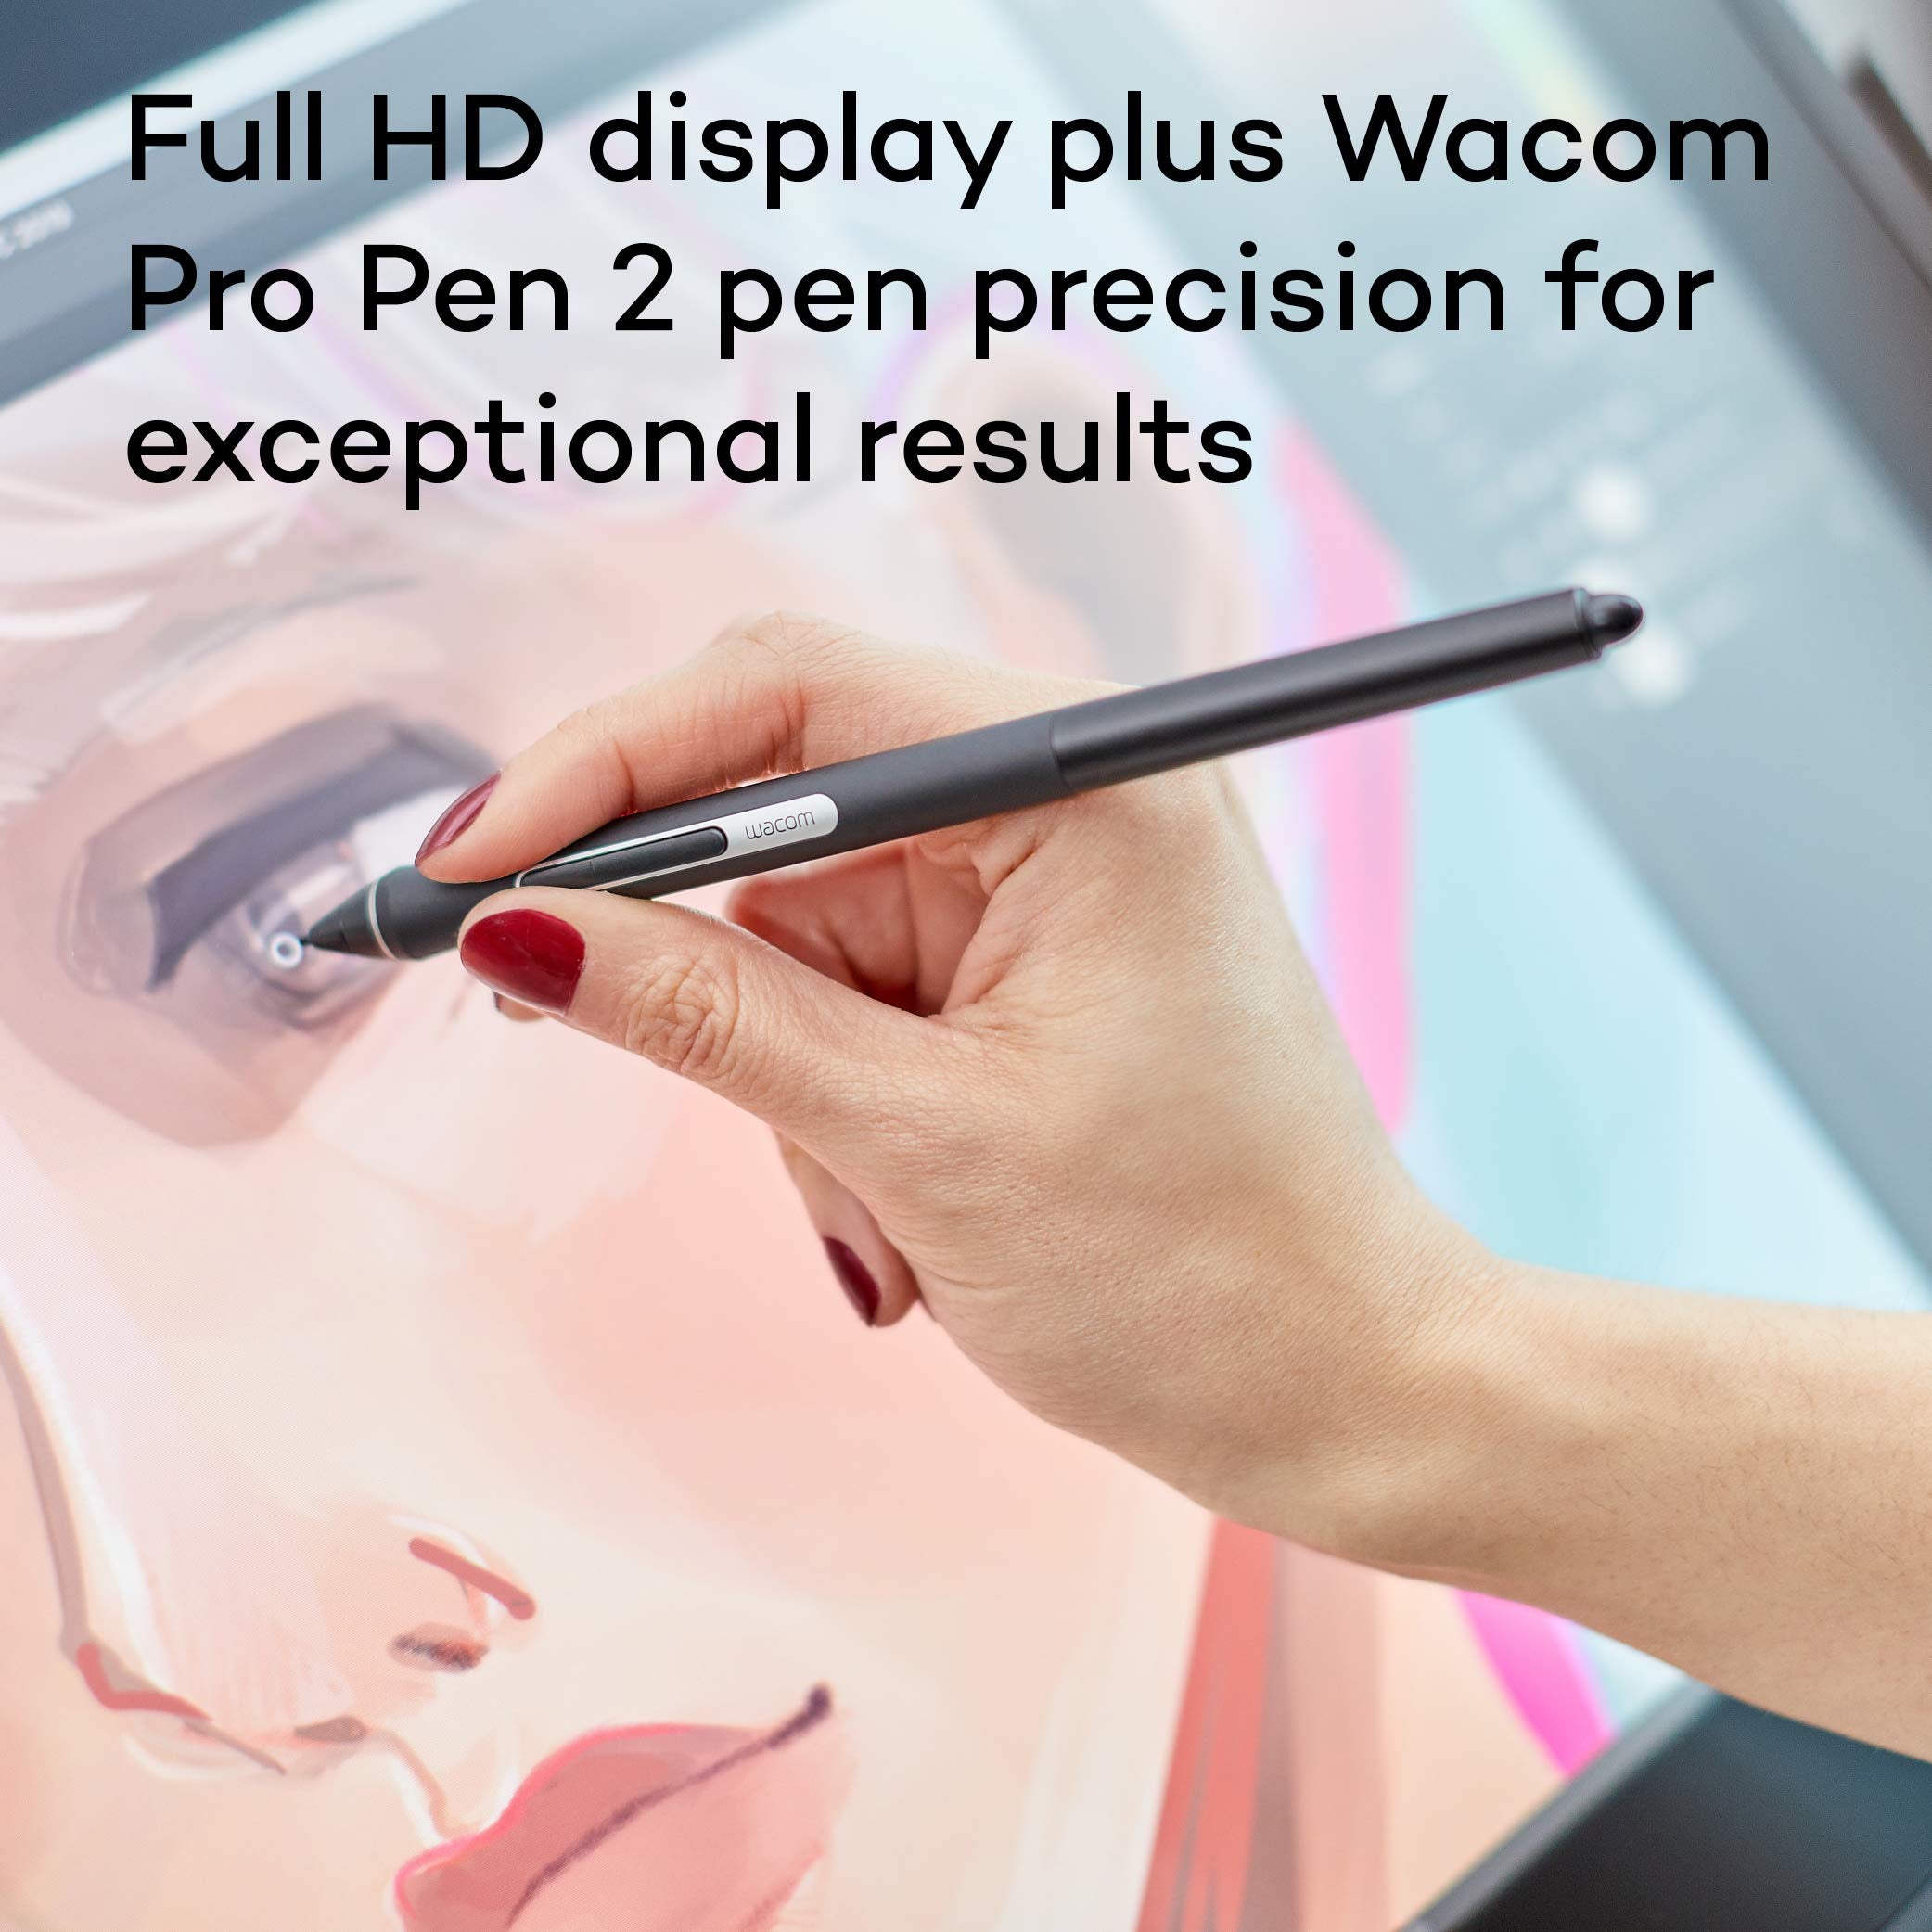 Wacom Cintiq 22 Creative Pen Display including adjustable Stand —for on screen Illustrating and Drawing, with 1920 x 1080 Full HD Display and Pro Pen 2 Pen Precision, Windows & Mac Compatible